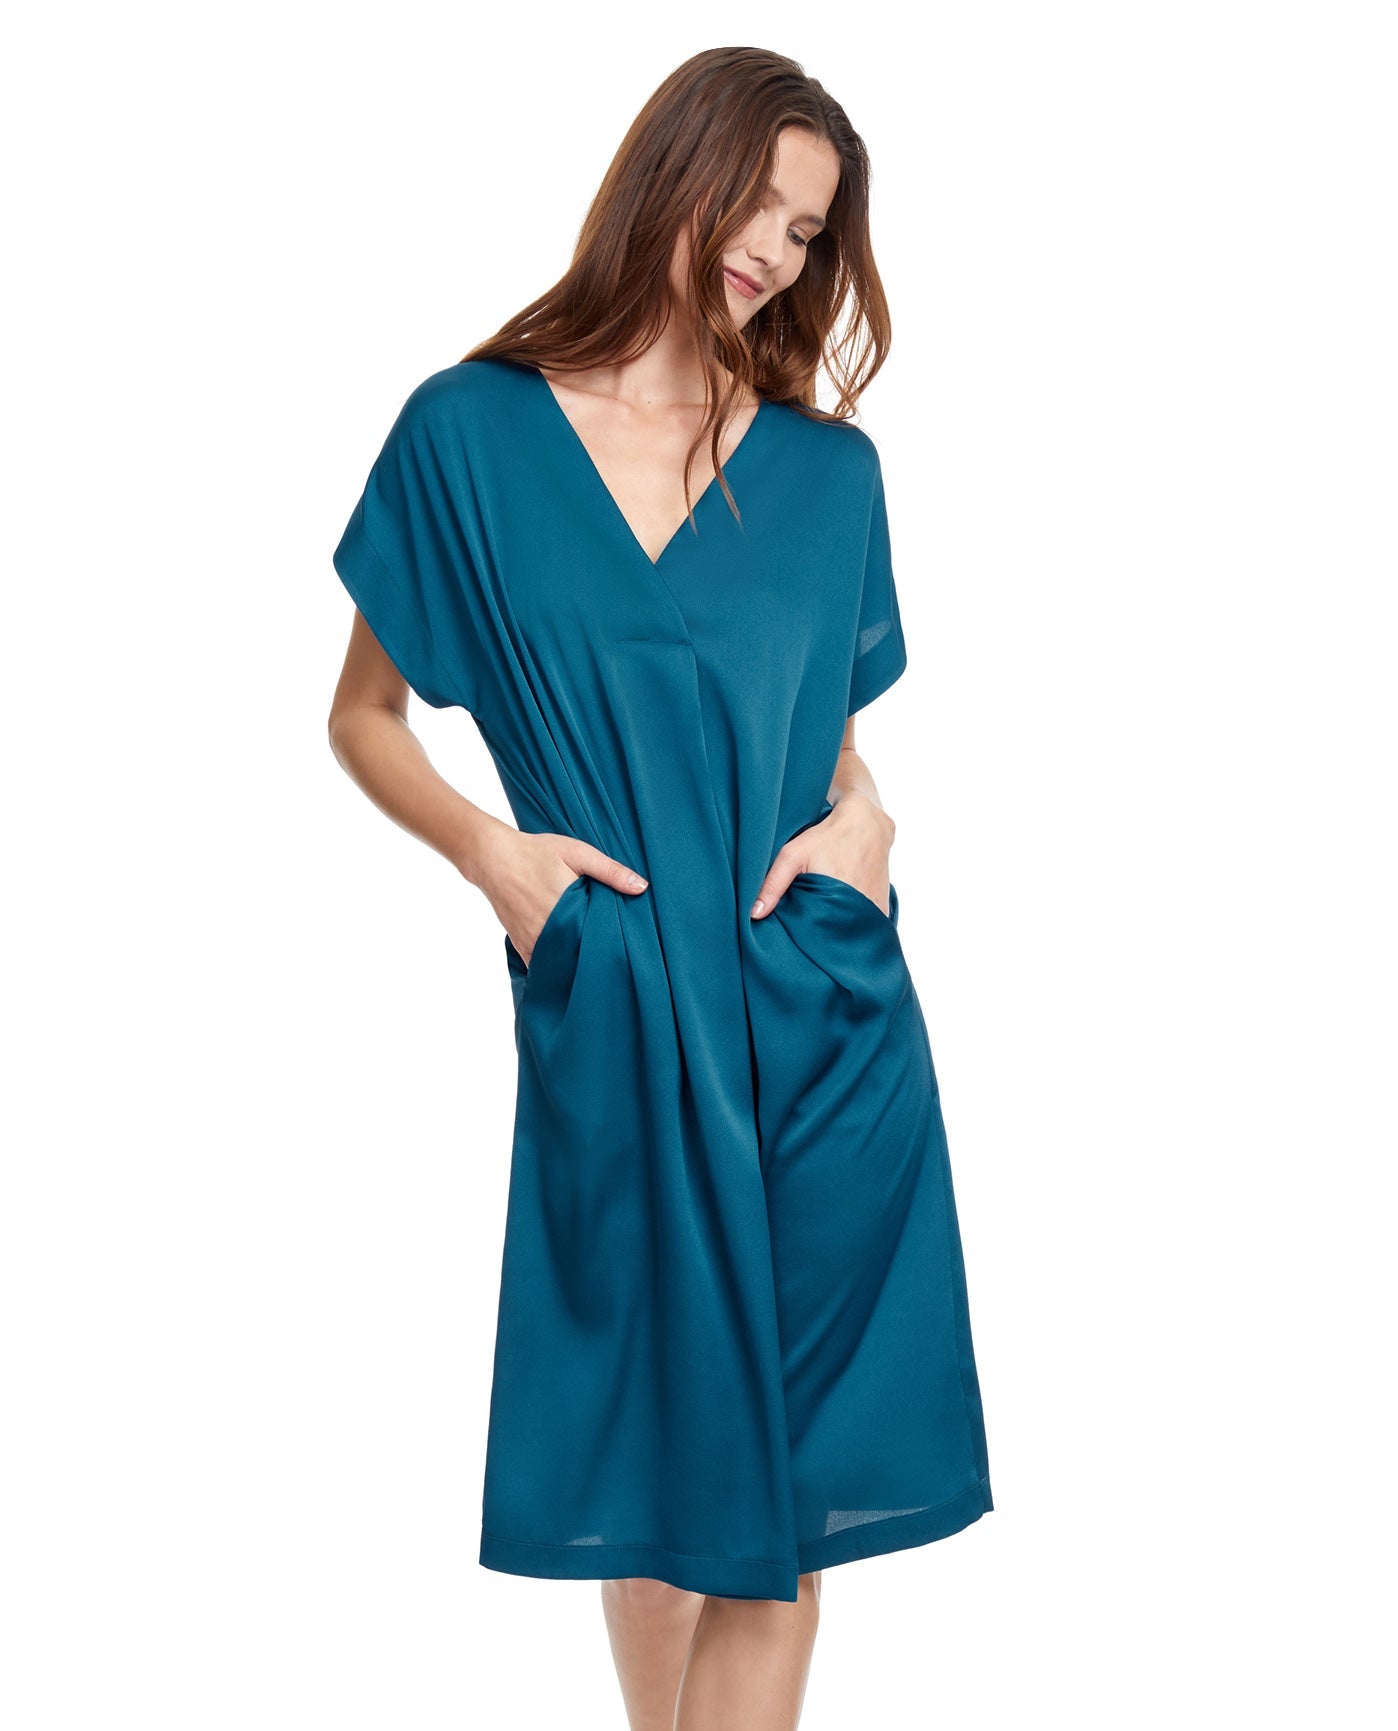 alternate front 1 View Of Gottex Classic Golden Touch V-Neck Long Tunic | Gottex Golden Touch Teal